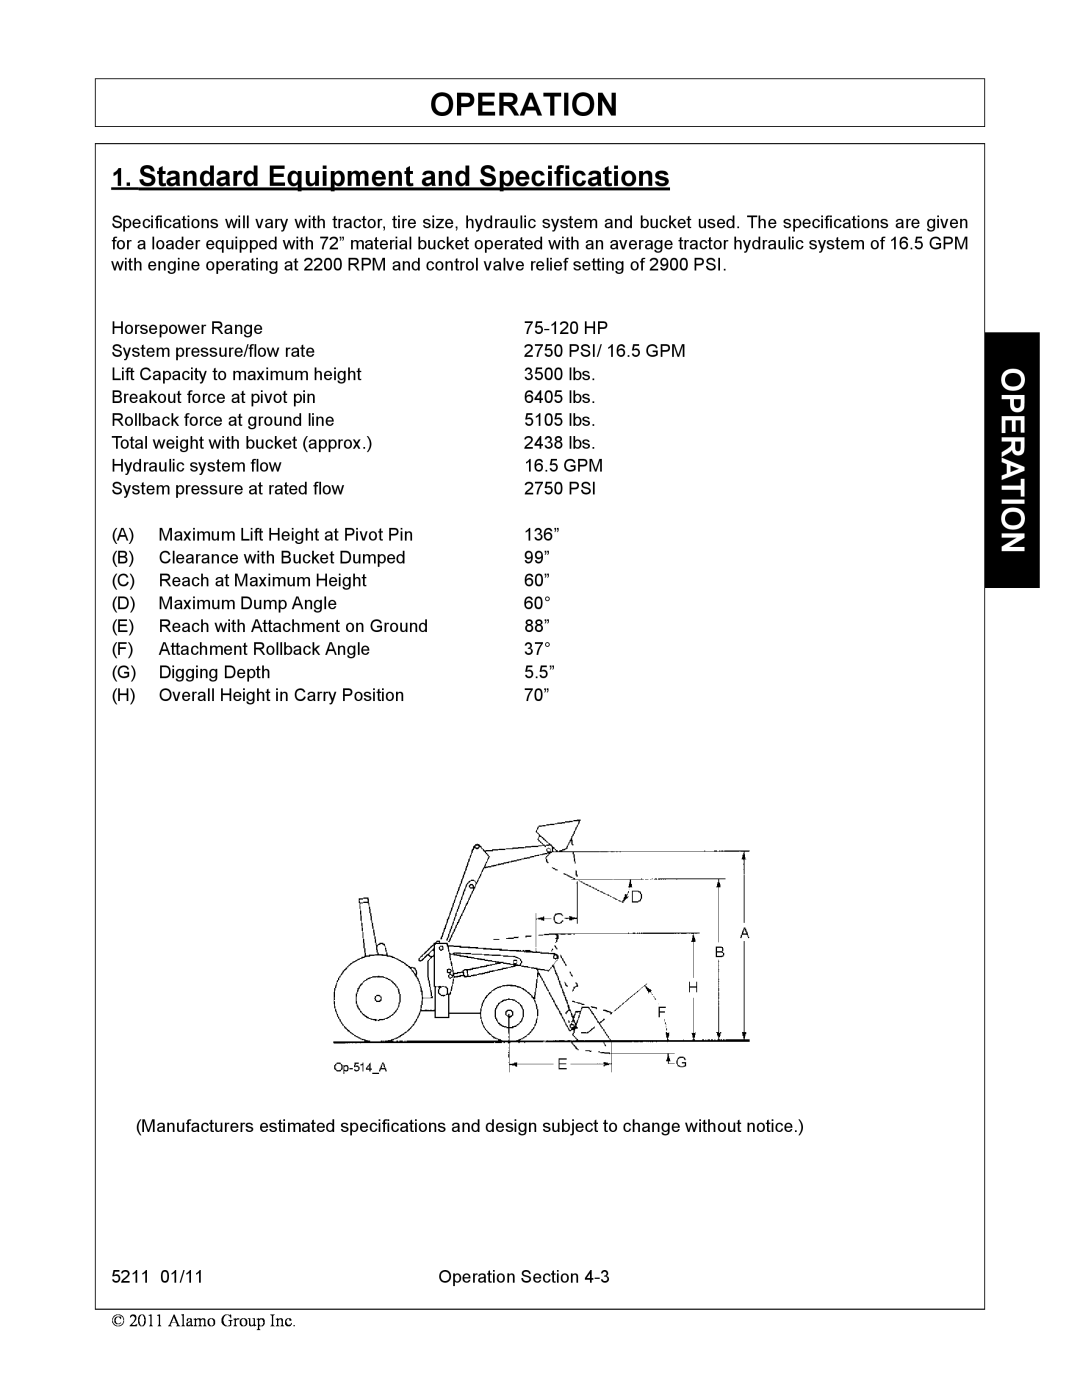 Servis-Rhino 5211 manual Operation, Standard Equipment and Specifications 